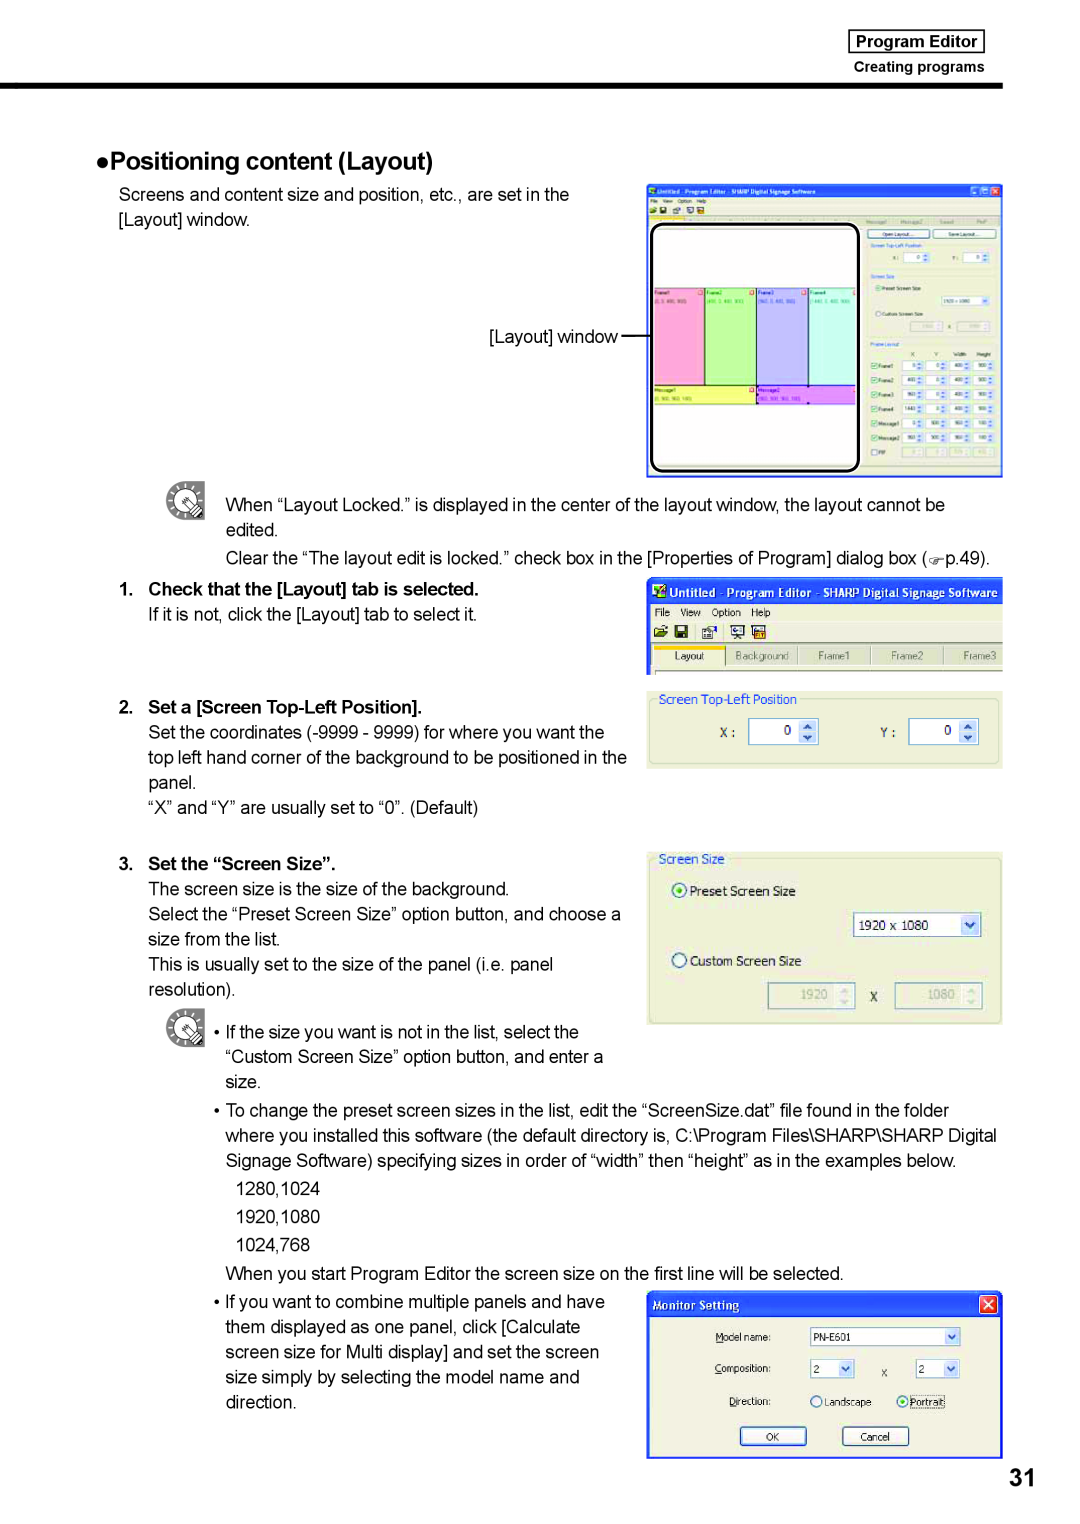 Sharp PNSV01 operation manual Positioning content Layout, Set a Screen Top-Left Position, Set the “Screen Size” 